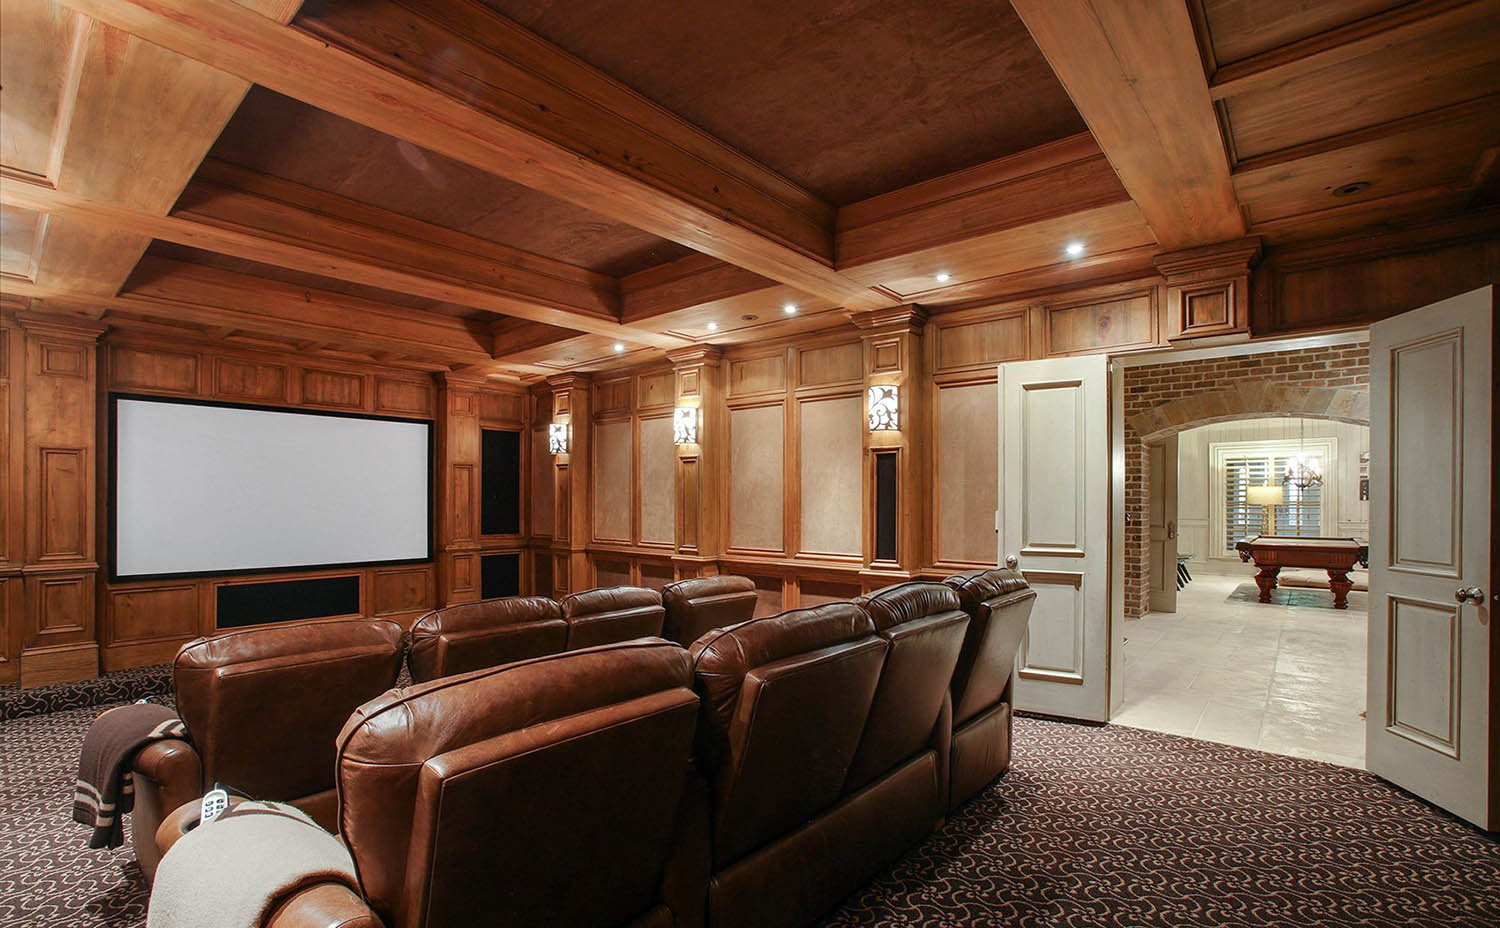 Wood theatre room with customwood coffered ceiling. Medium brown stain.